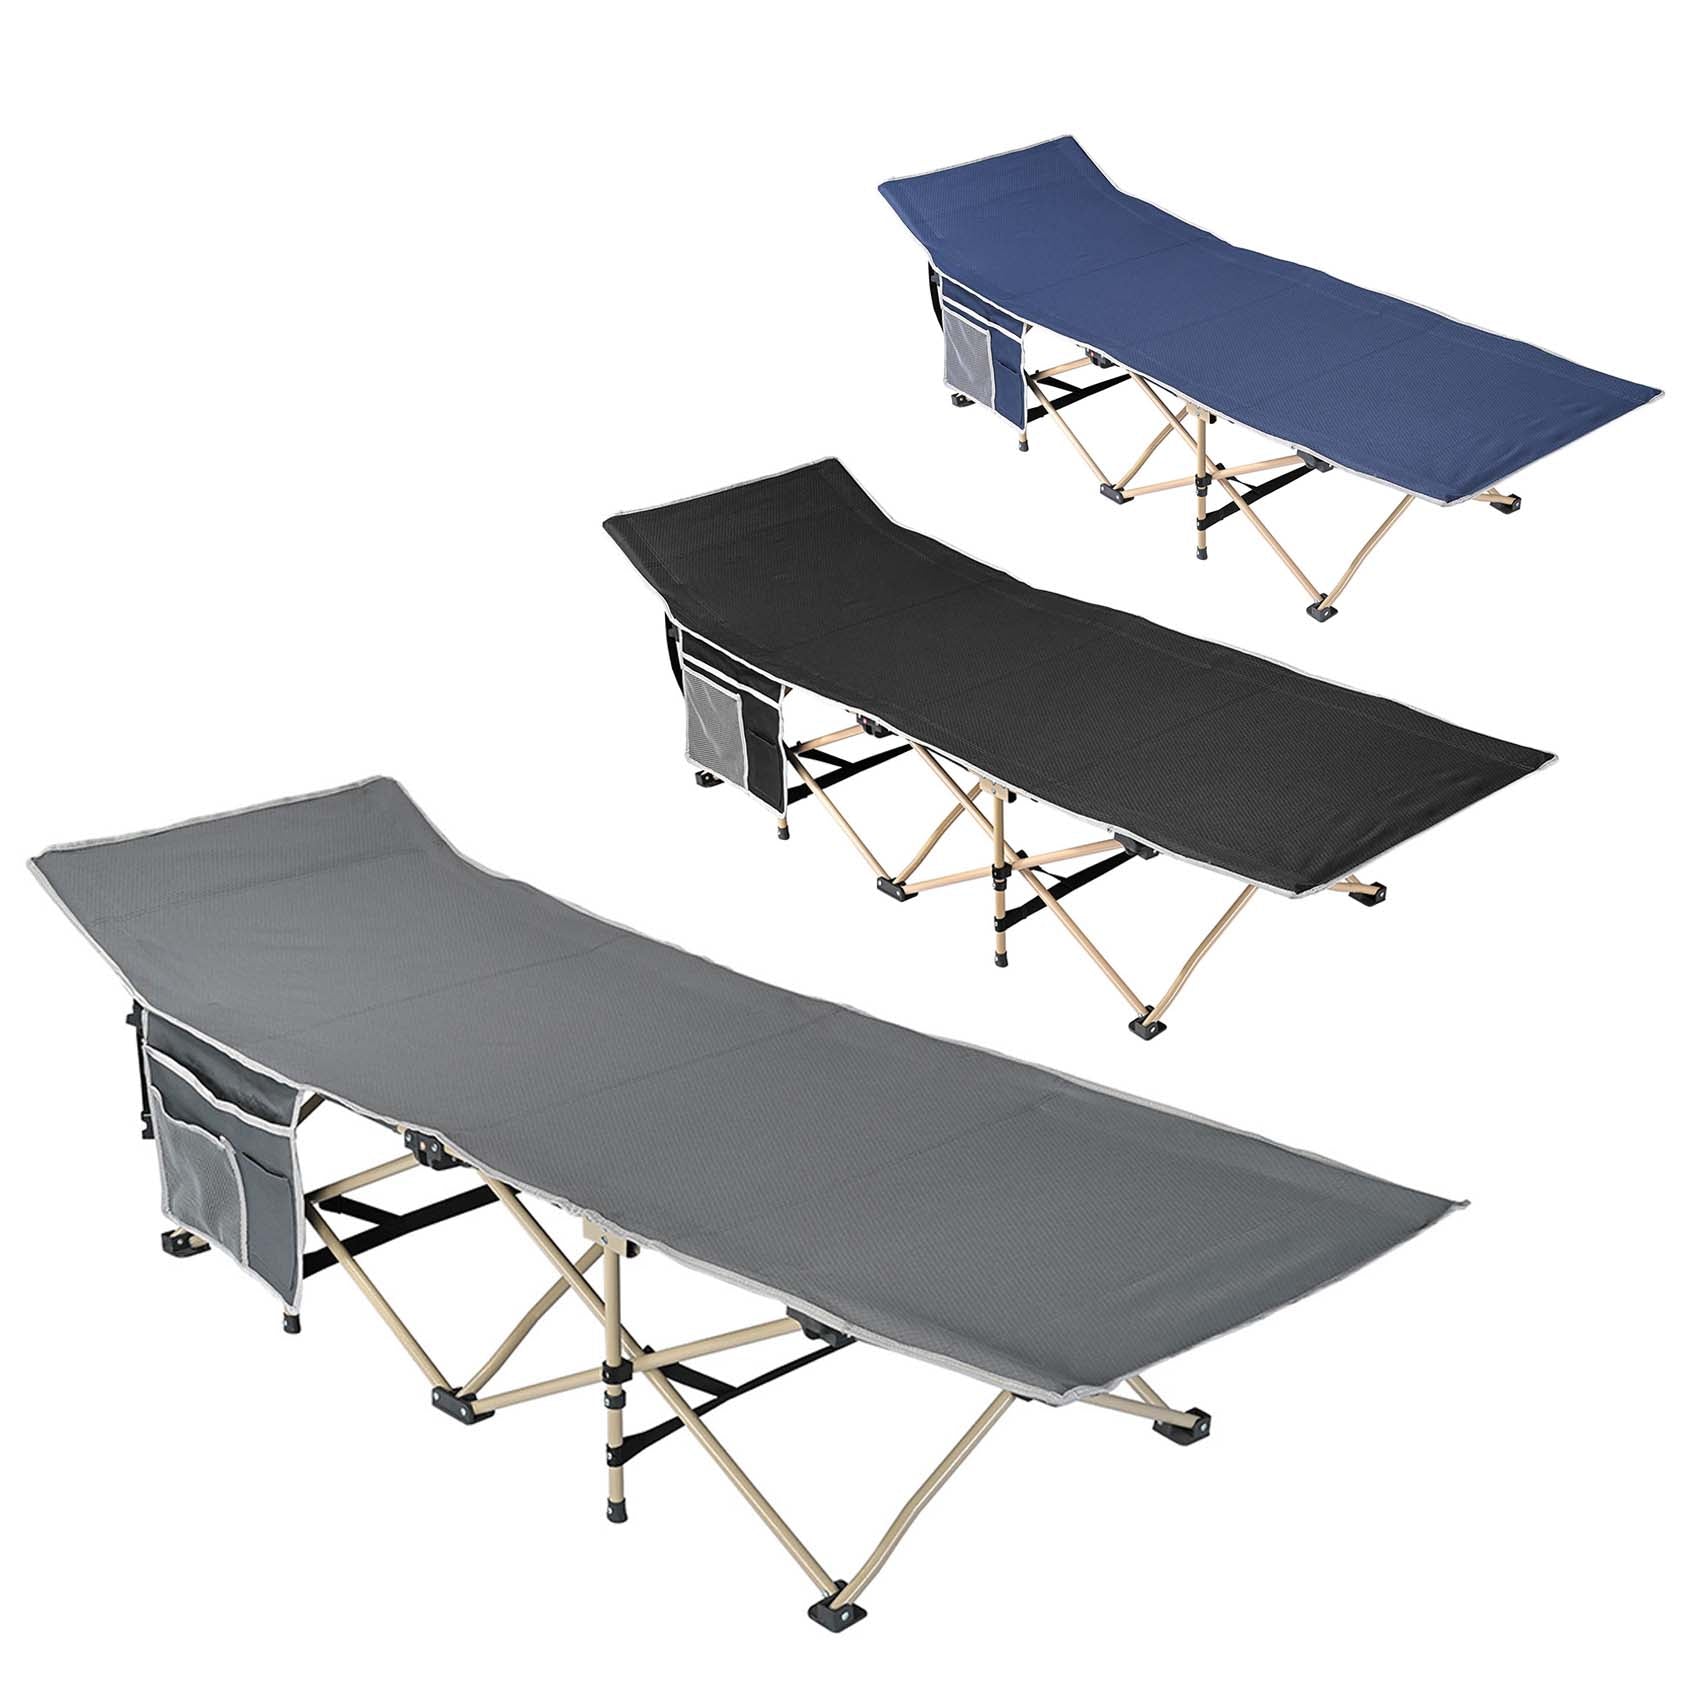 Yescom Folding Camping Cot Travel Sleeping Bed